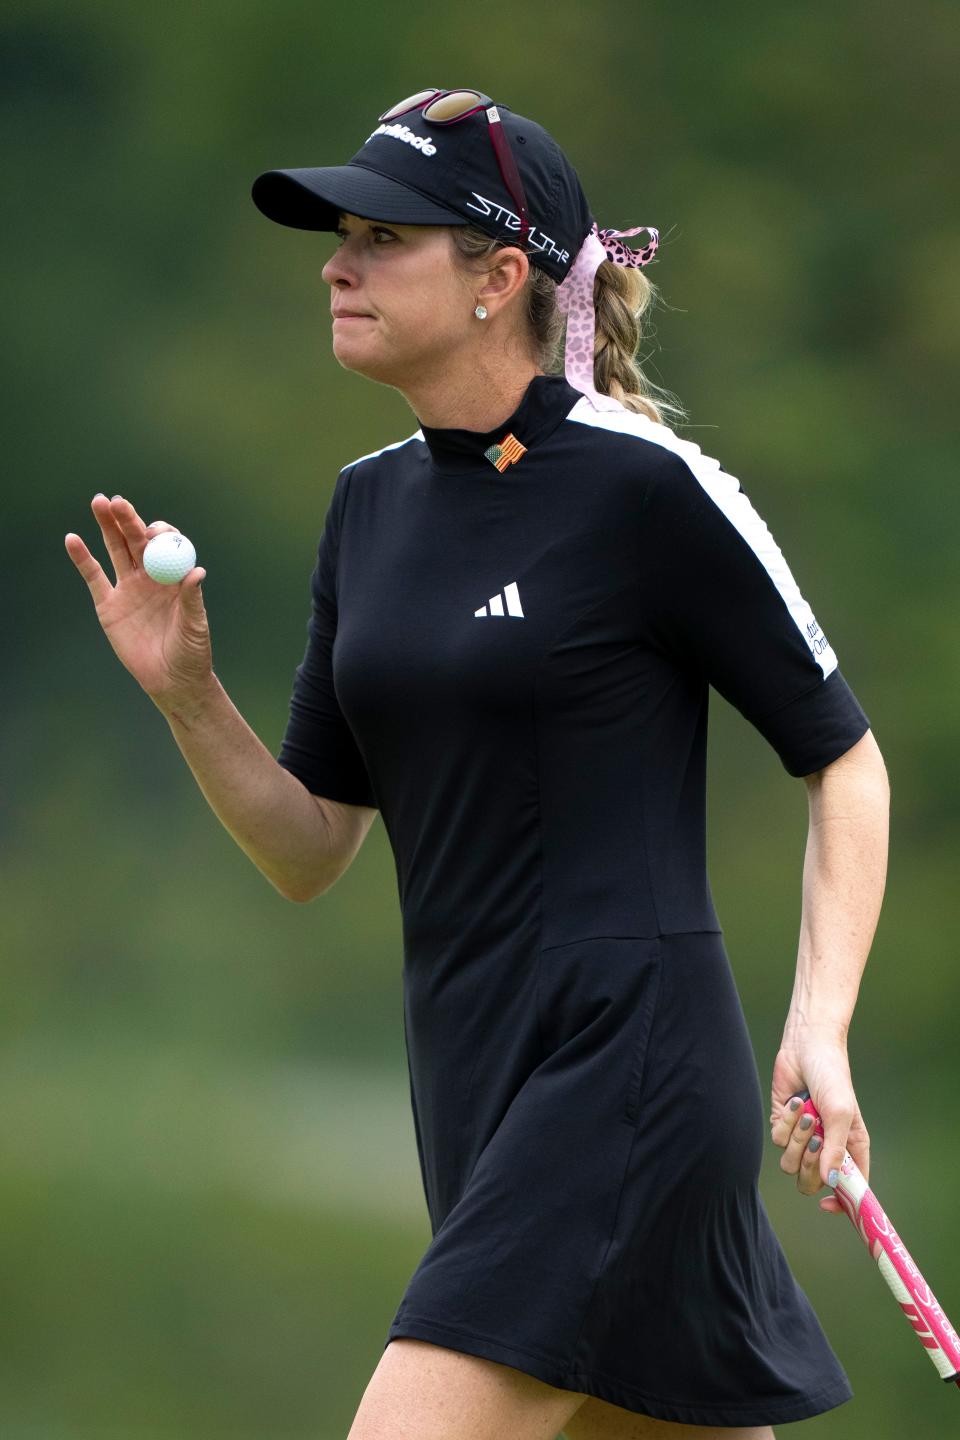 Paula Creamer, of Pleasanton, Calif., waives after putting on hole 1 during round 1 of the 2023 Kroger Queen City Championship in at Kenwood Country Club in Madeira, Ohio, on Thursday, Sept. 7, 2023.